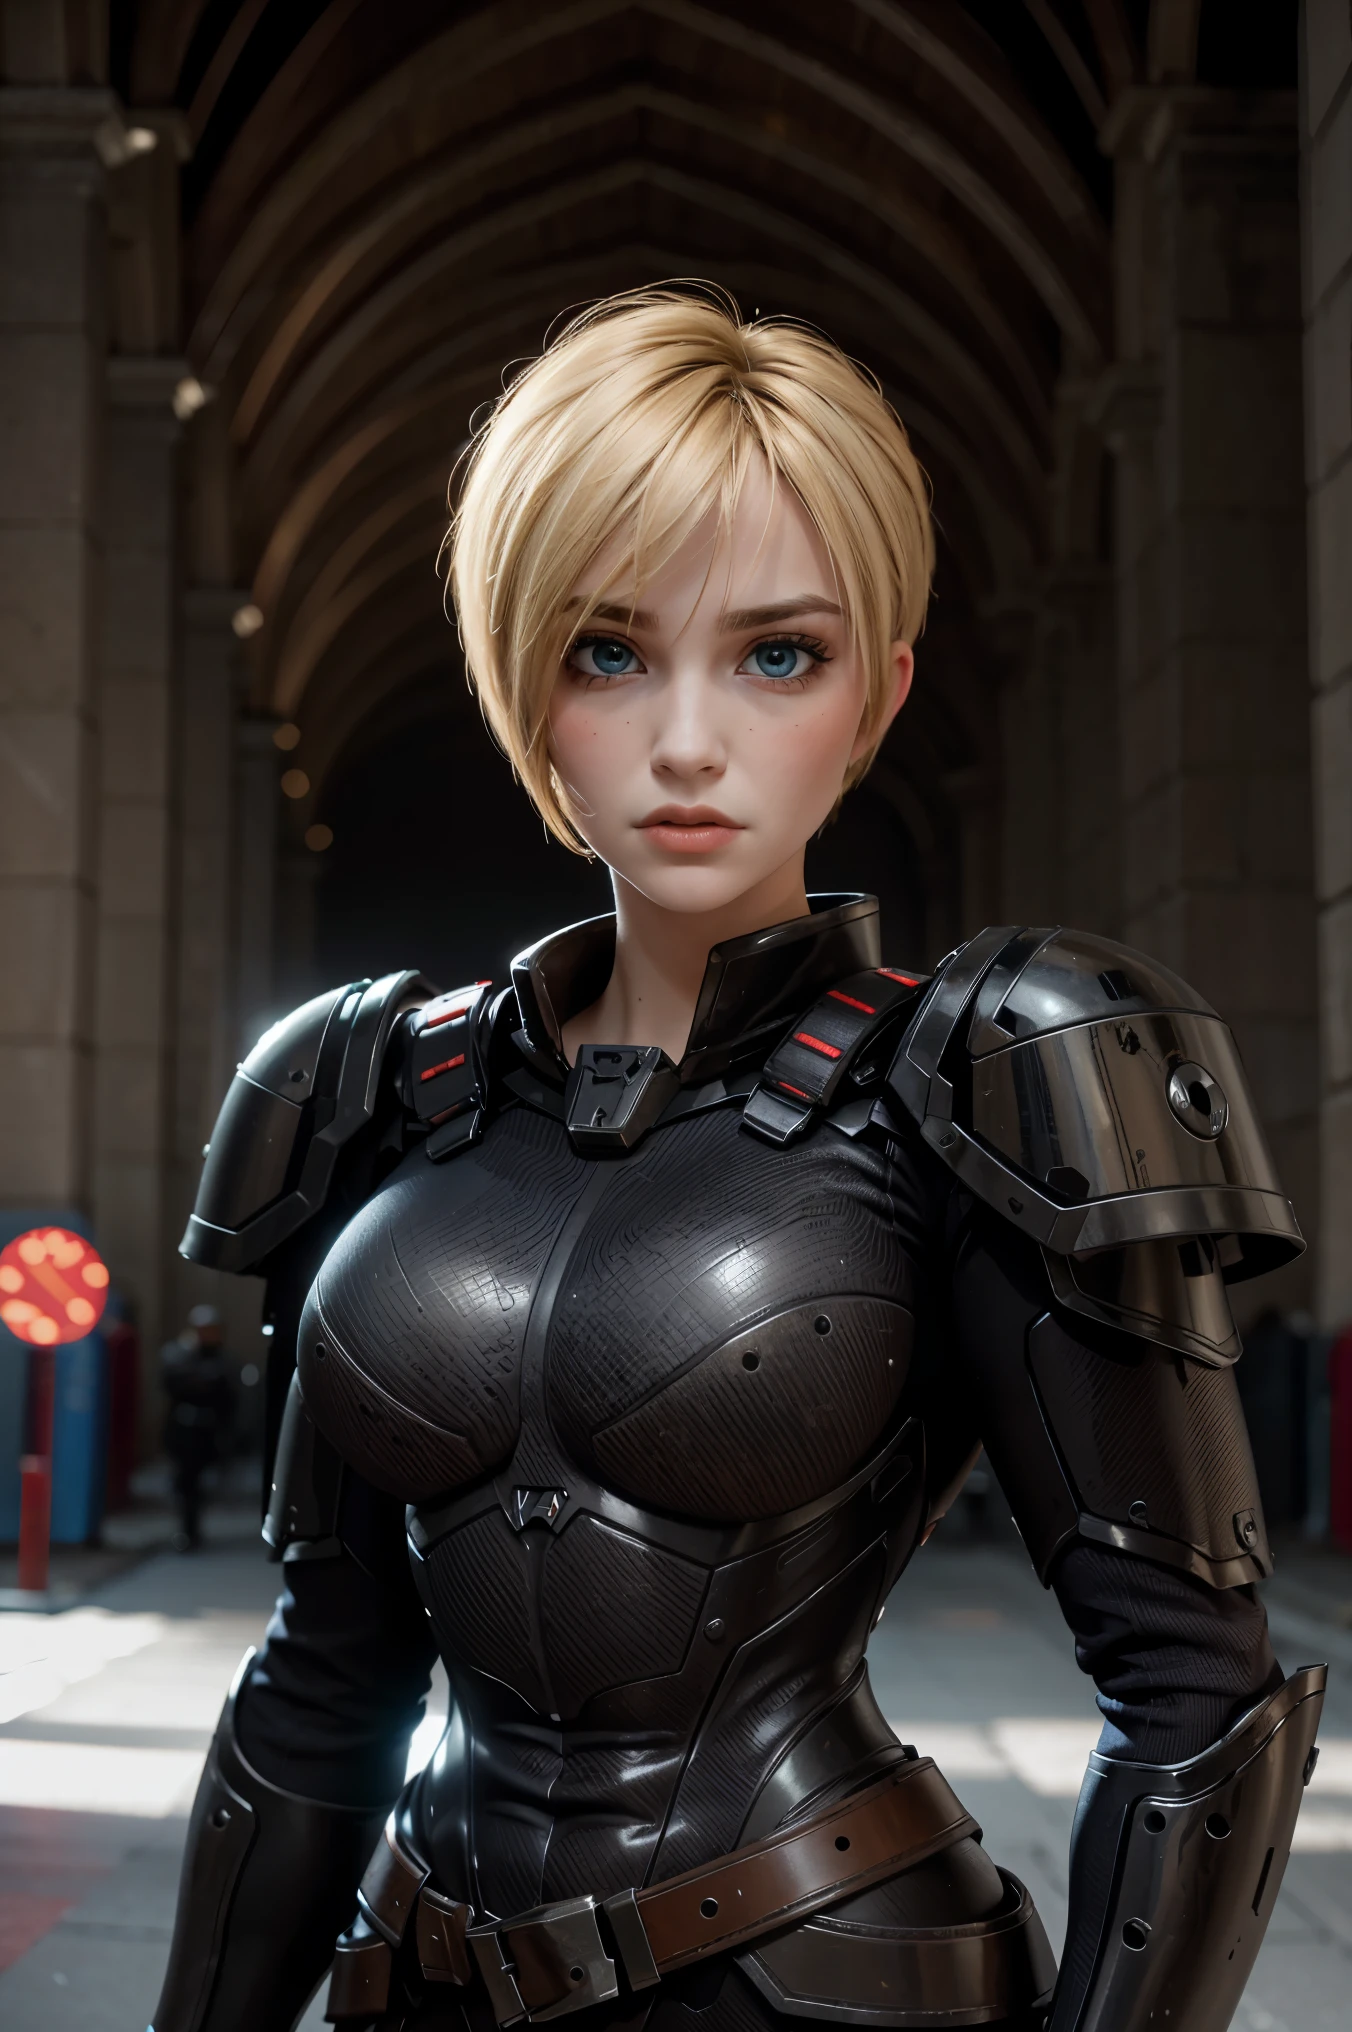 A stunning and intricate full color Ultra-HD portrait, girl, short golden blonde hair left bang, blue eyes, detailed face, wearing heavy tight fitting black and red armor, epic character composition, alessio albi, nina masic, sharp focus , natural lighting. , subsurface dispersion, f2, 35mm,

